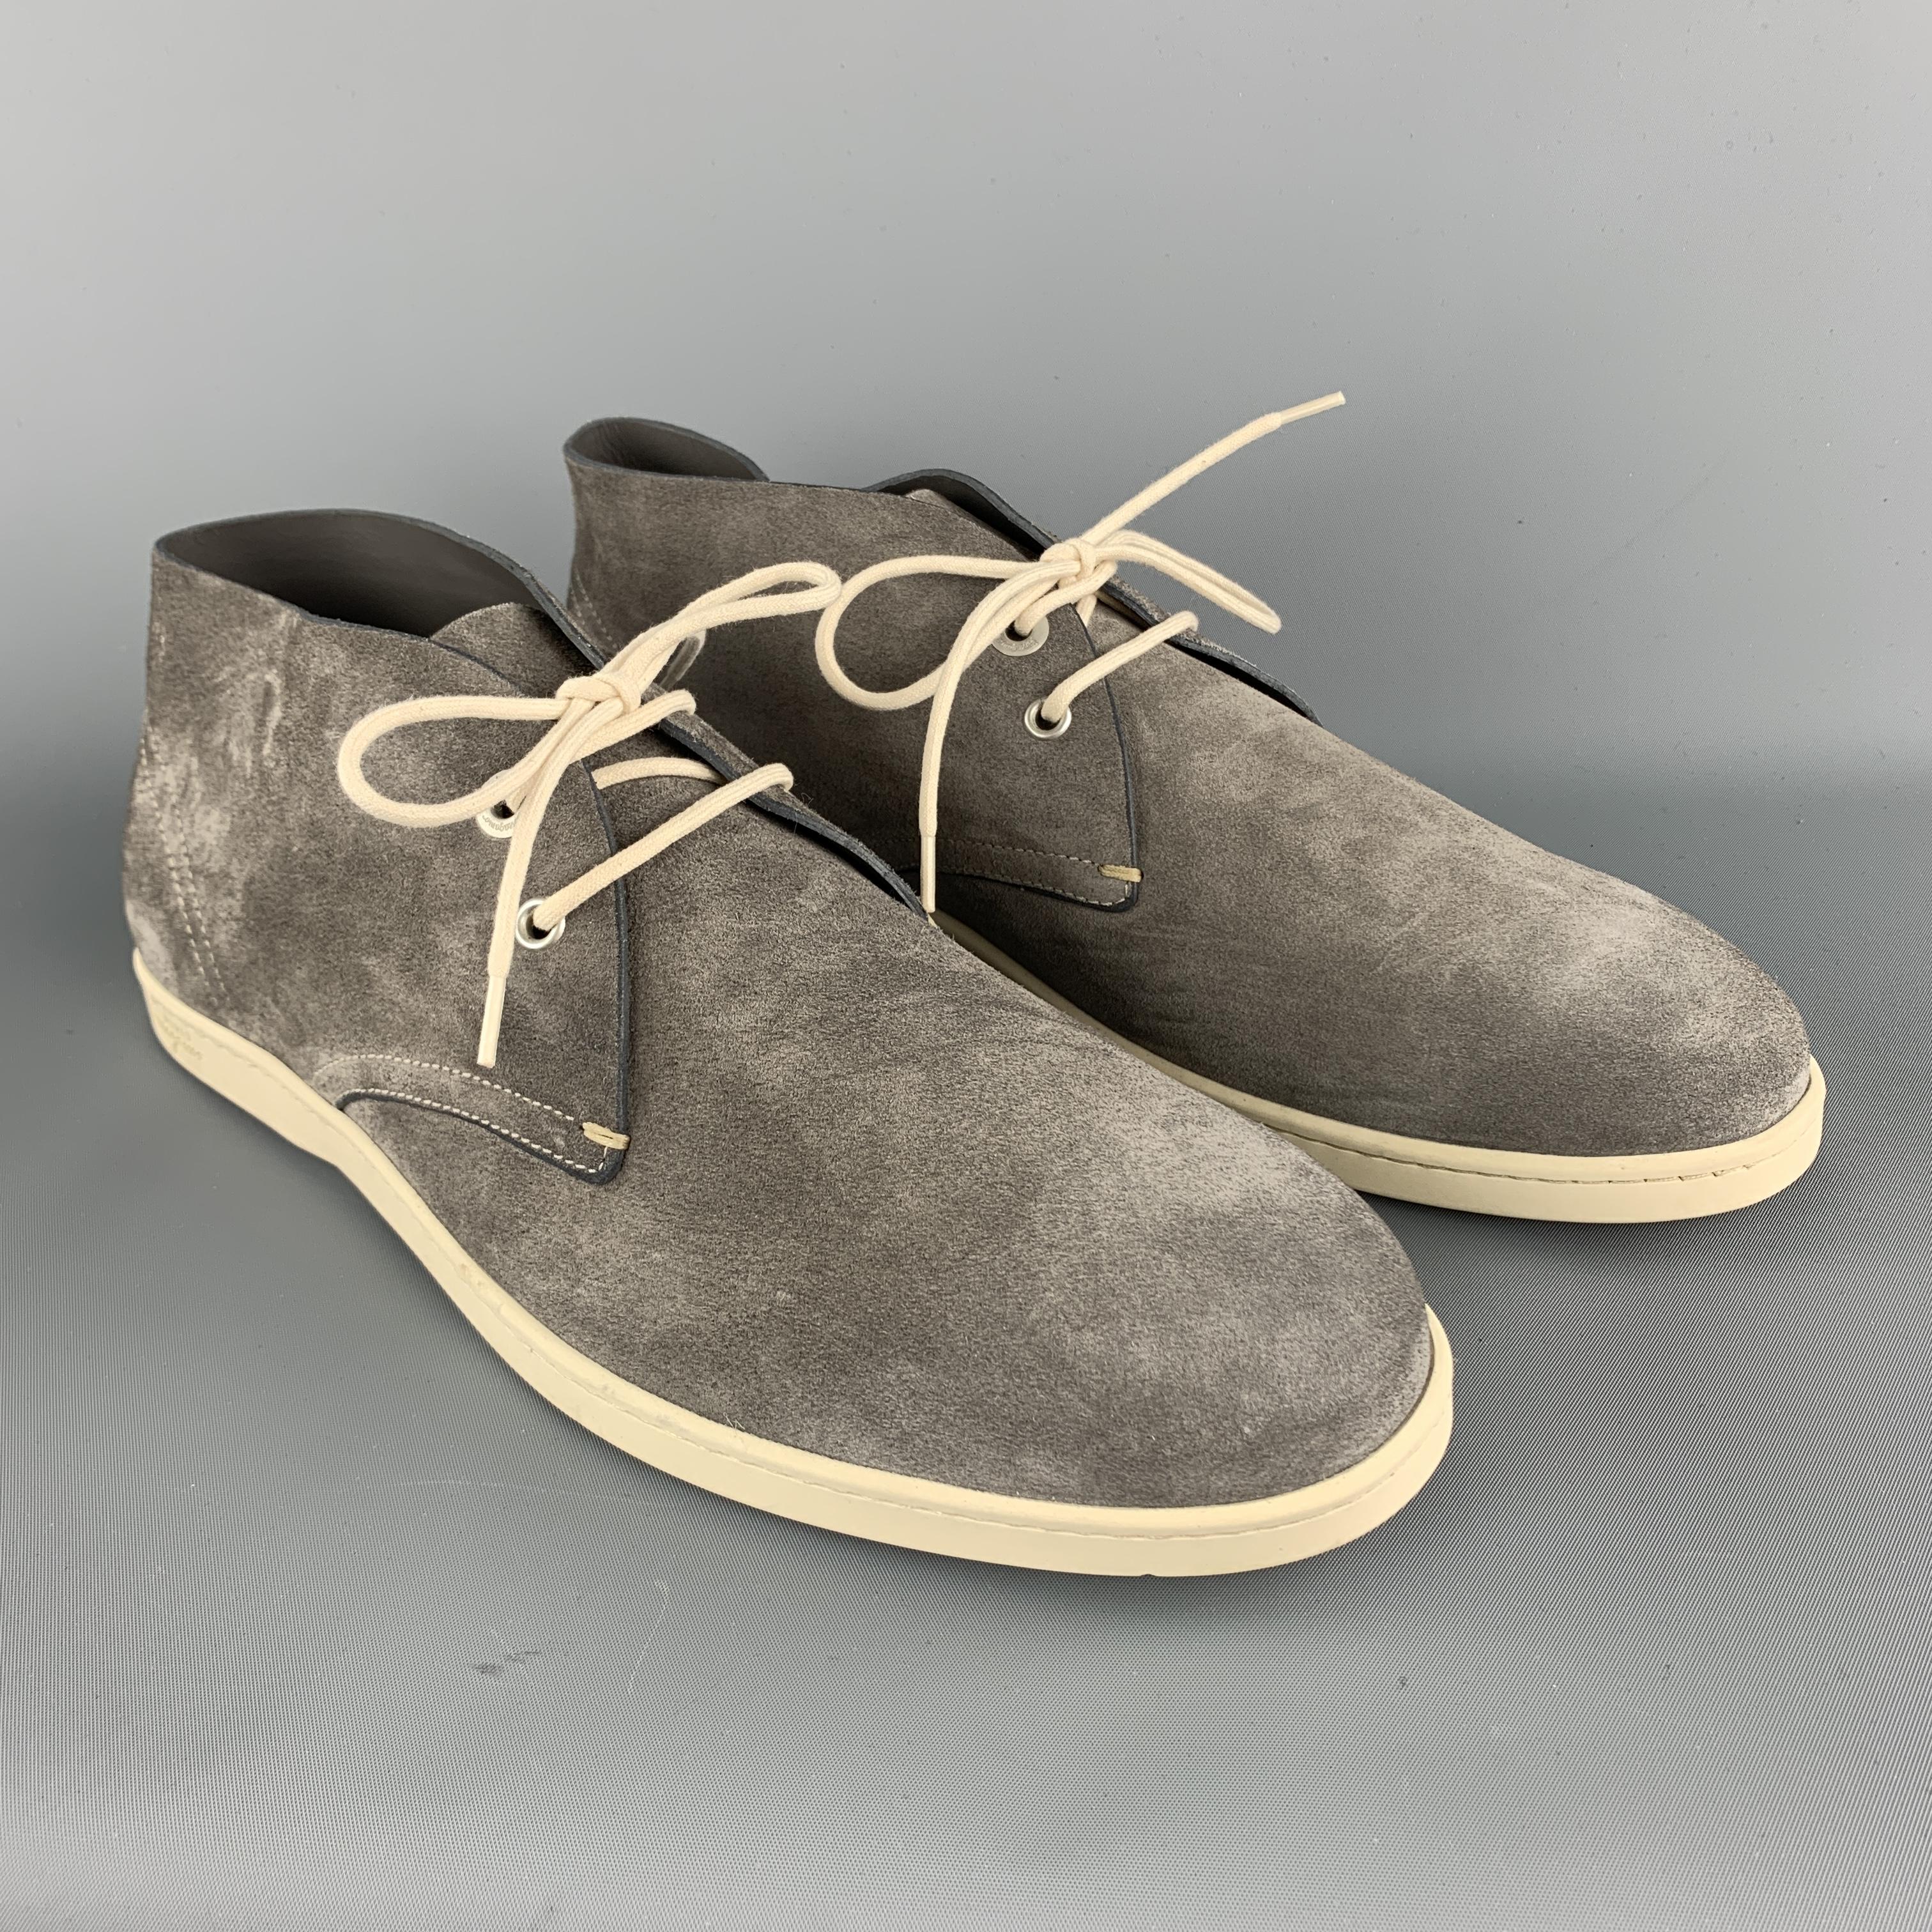 SALVATORE FERRAGAMO Chukka Boots comes in a solid suede material, with a contrast white lace, a branded insole, and a contrast sole. Made in Italy.

Brand New.
Marked: 2018 44 9417

Outsole: 12 x 4 in.
Height: 4 in. 